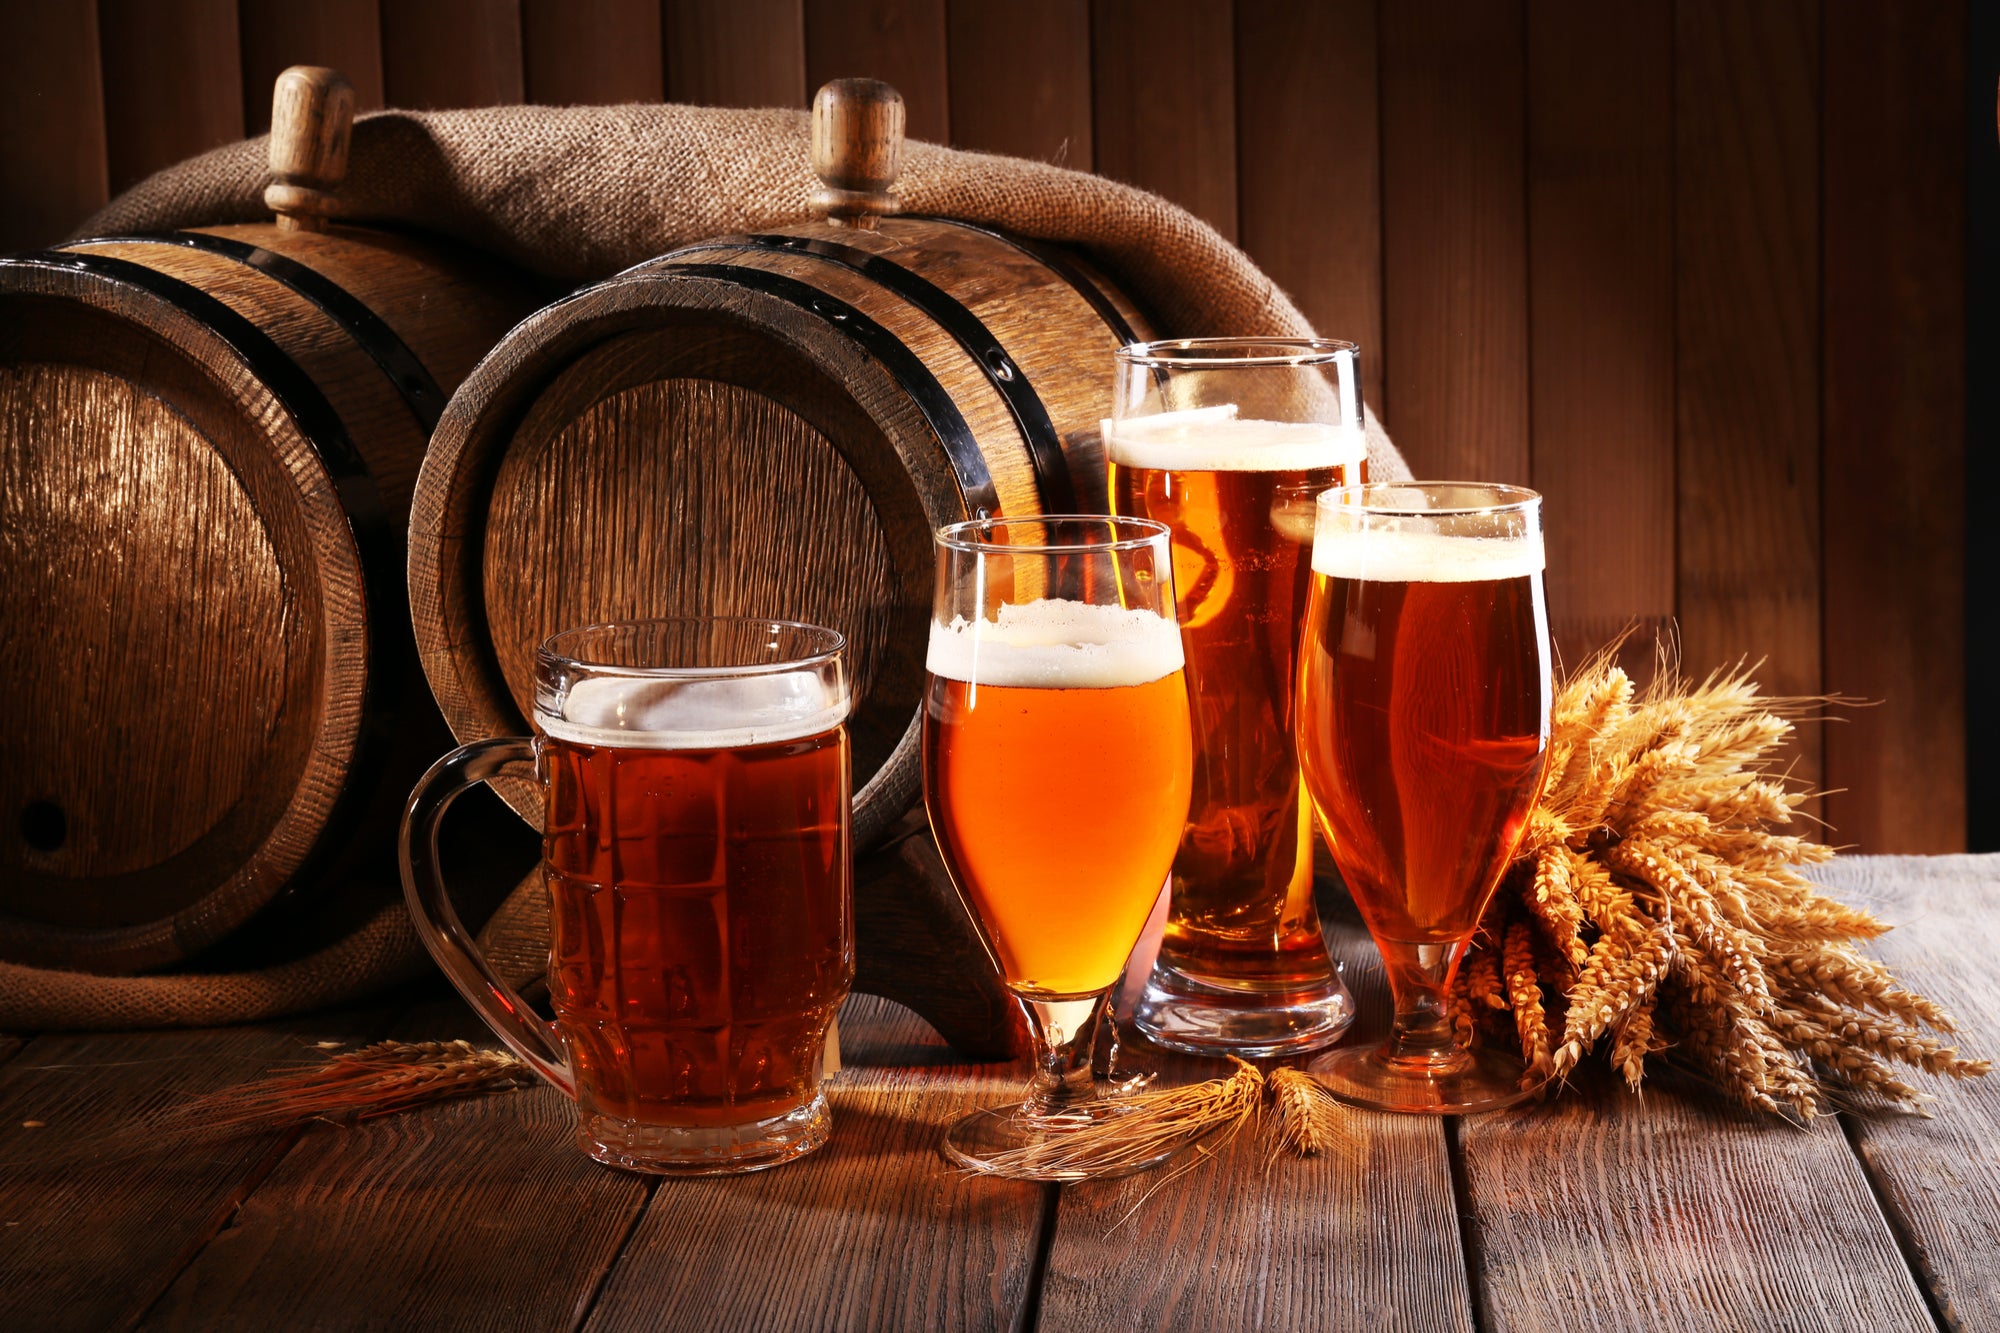 Full recovery of beer sector possible by end of this year 25